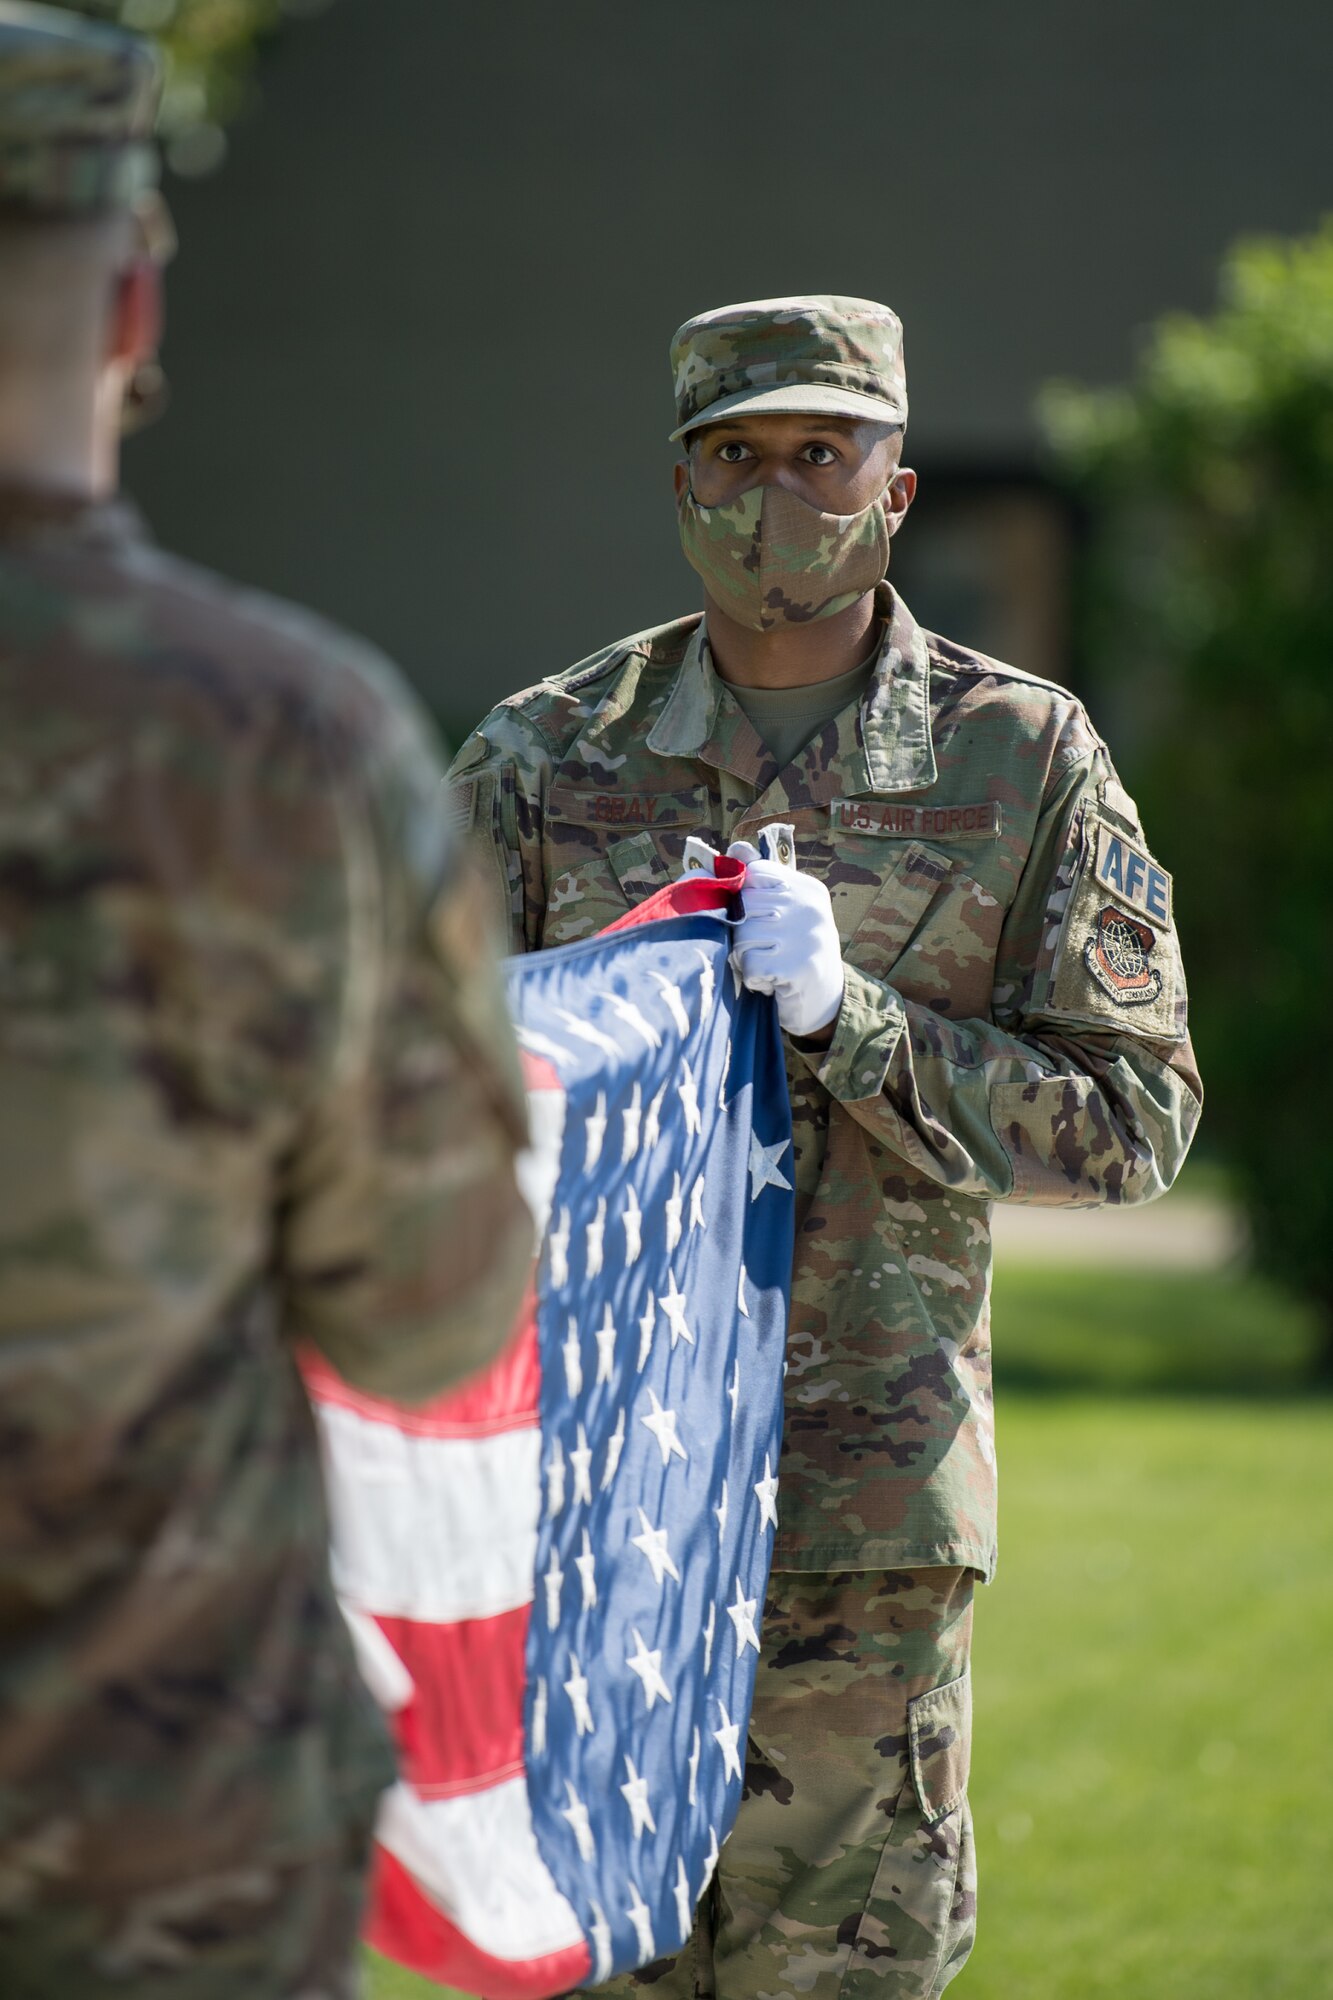 Members of the Dover Air Force Base Honor Guard prepare to fold the American flag during a retreat ceremony on Peace Officers Memorial Day May 15, 2020, at Dover Air Force Base, Delaware. The 436th Security Forces Squadron hosted the ceremony as part of National Police Week, which honors those in the law enforcement profession who have made the ultimate sacrifice. (U.S. Air Force photo by Mauricio Campino)